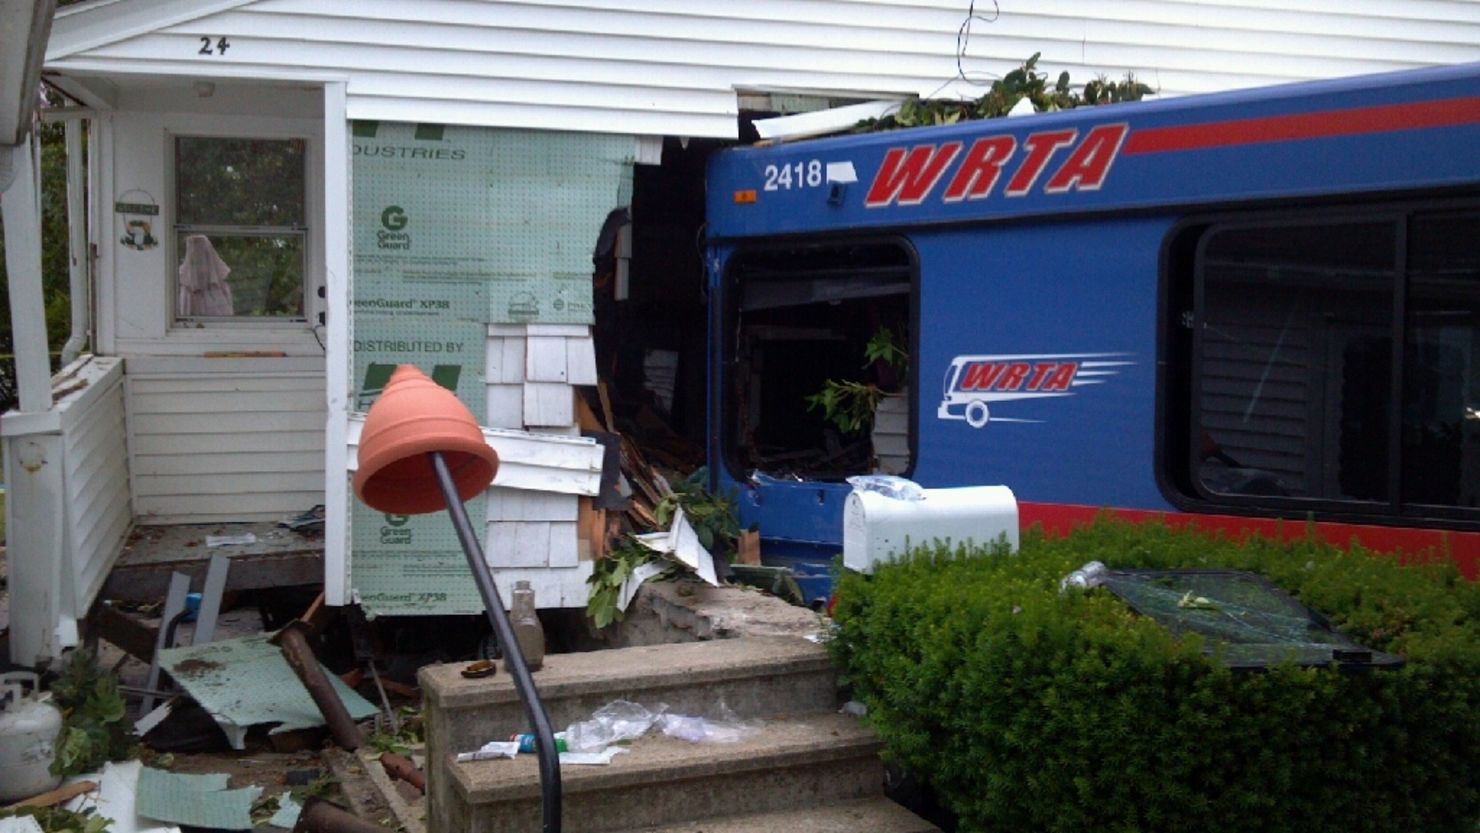 A public bus crashed into a central Massachusetts home on Monday.